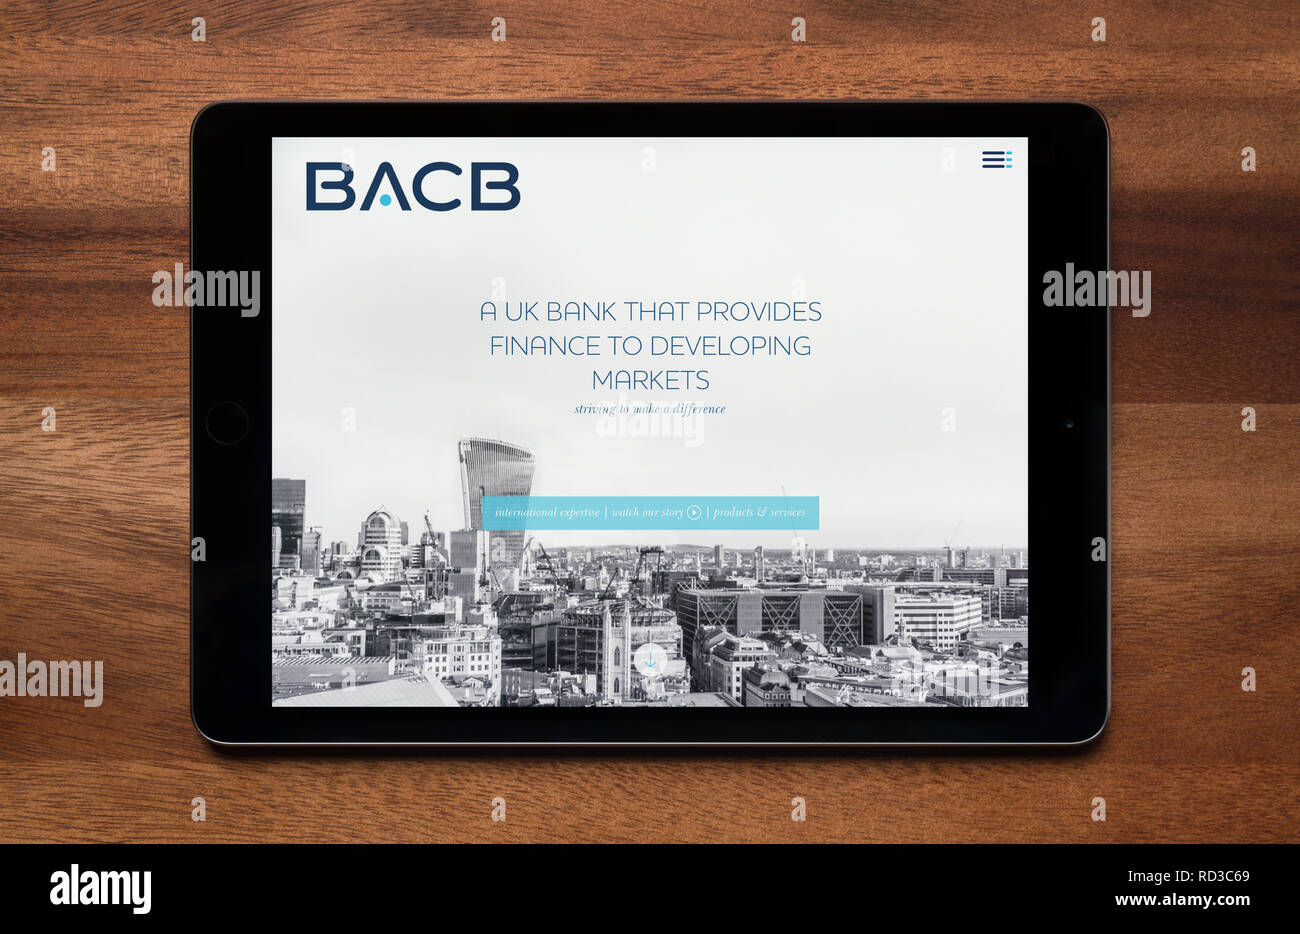 The website of British Arab Commercial Bank (BACB) is seen on an iPad tablet, which is resting on a wooden table (Editorial use only). Stock Photo